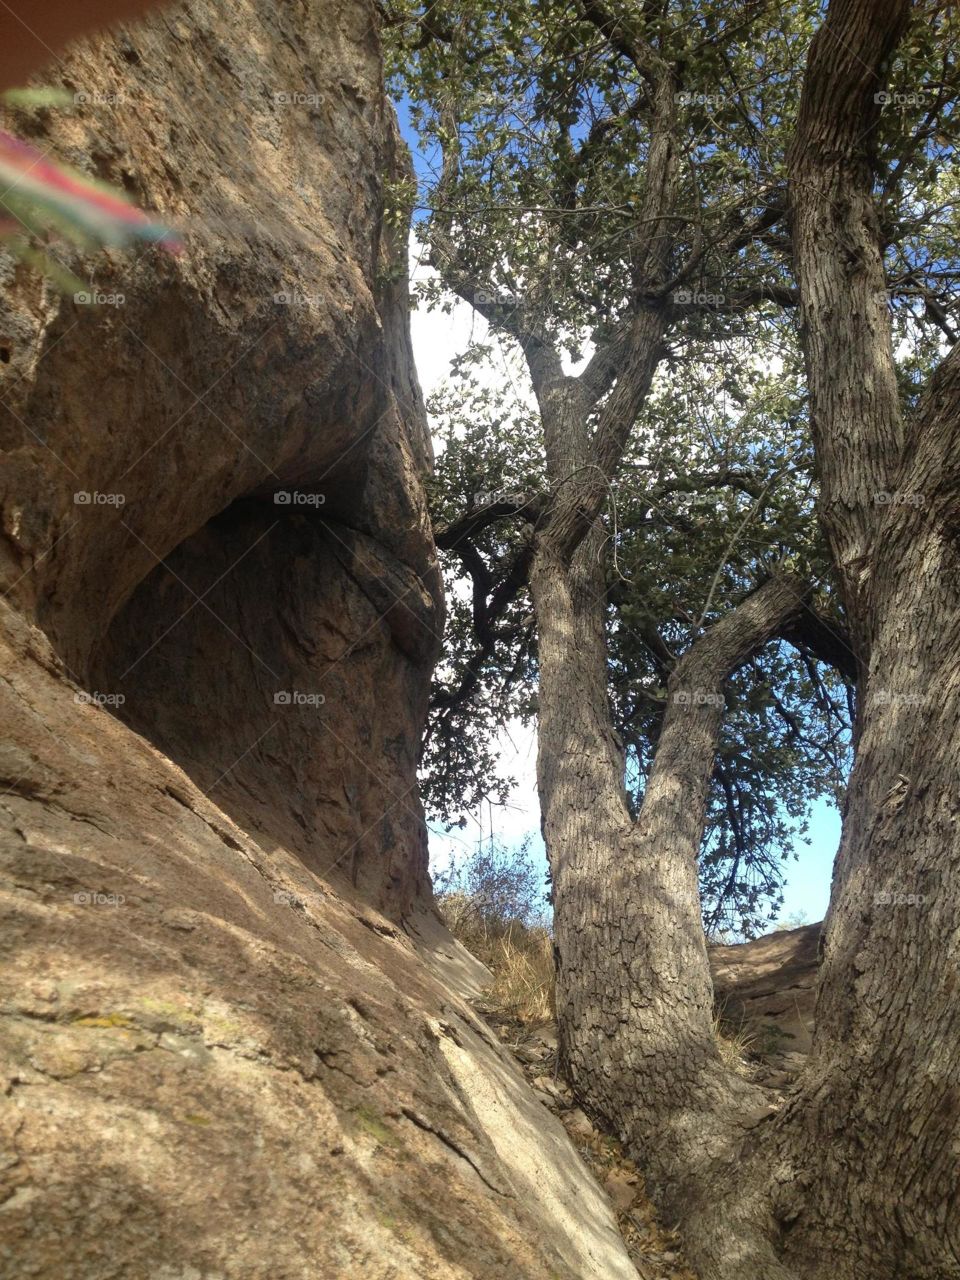 Resistant . Tree grows from crack in boulder 